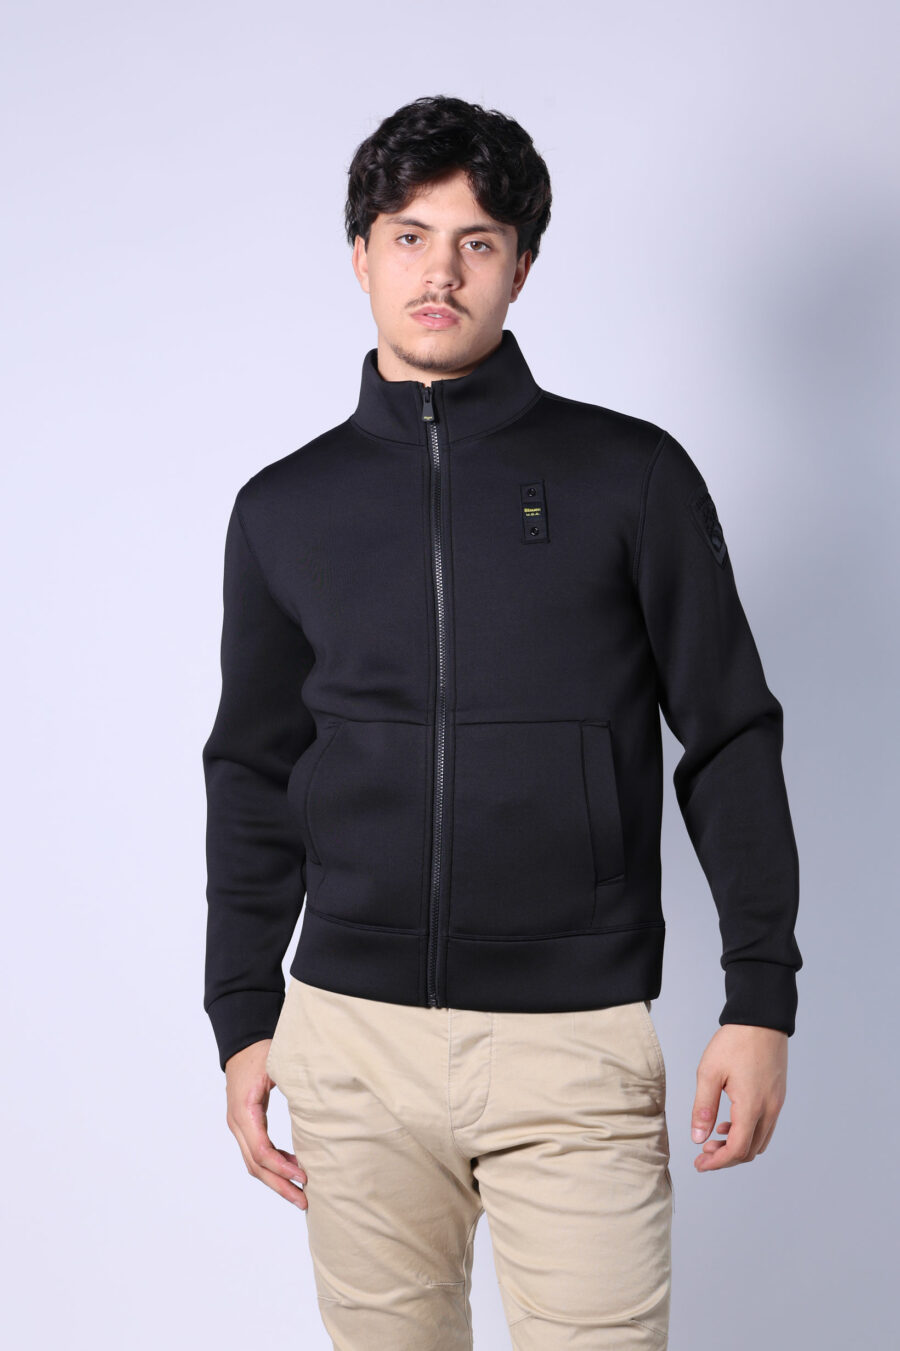 Black sweatshirt with zip and monochrome logo patch - Untitled Catalog 05632